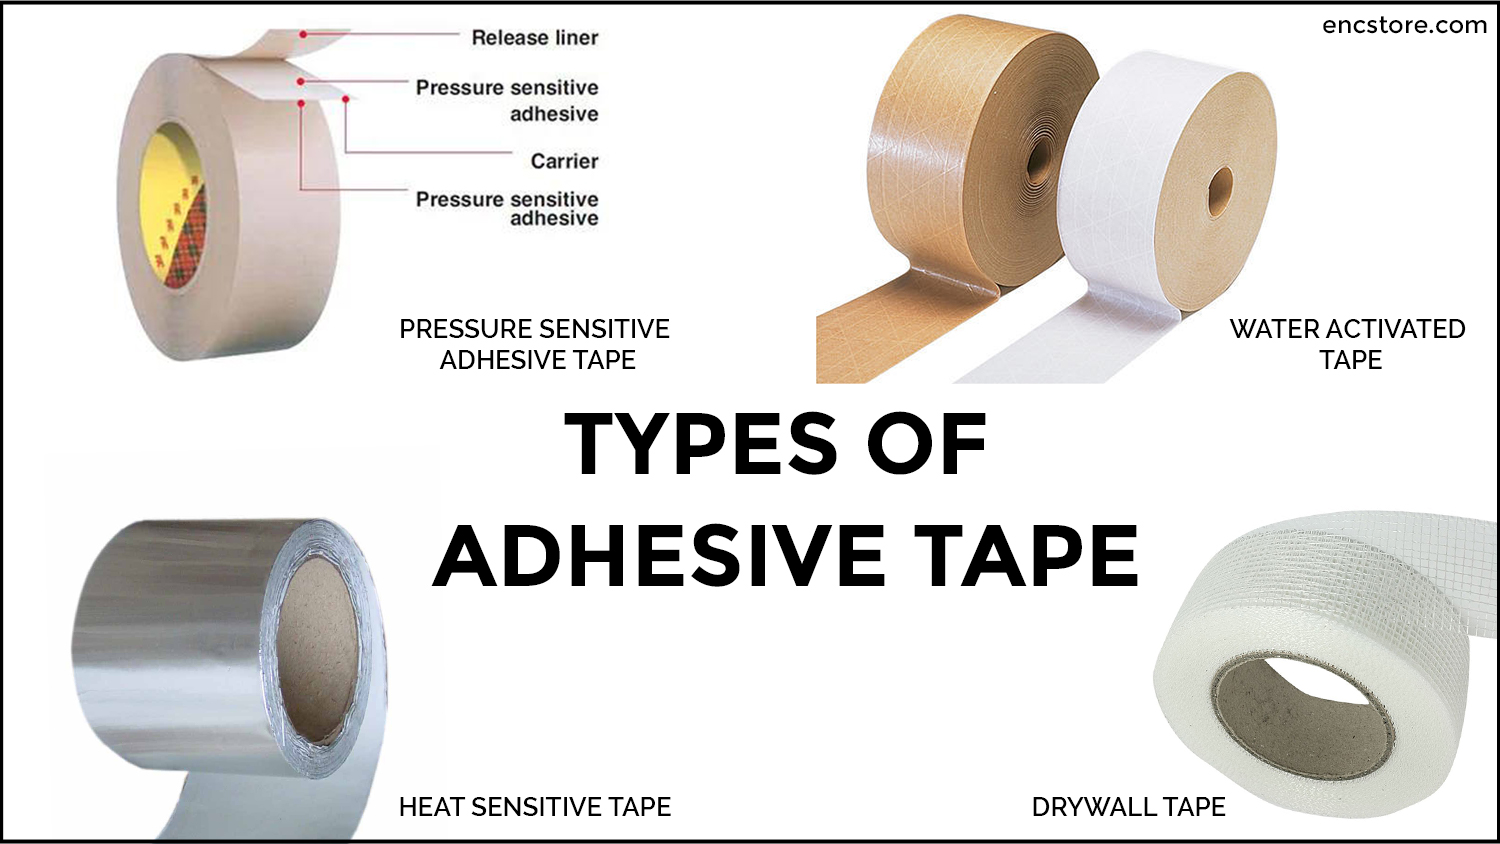 Adhesive Tape Rolls Of Double-sided Adhesive Tape For Body Push-up